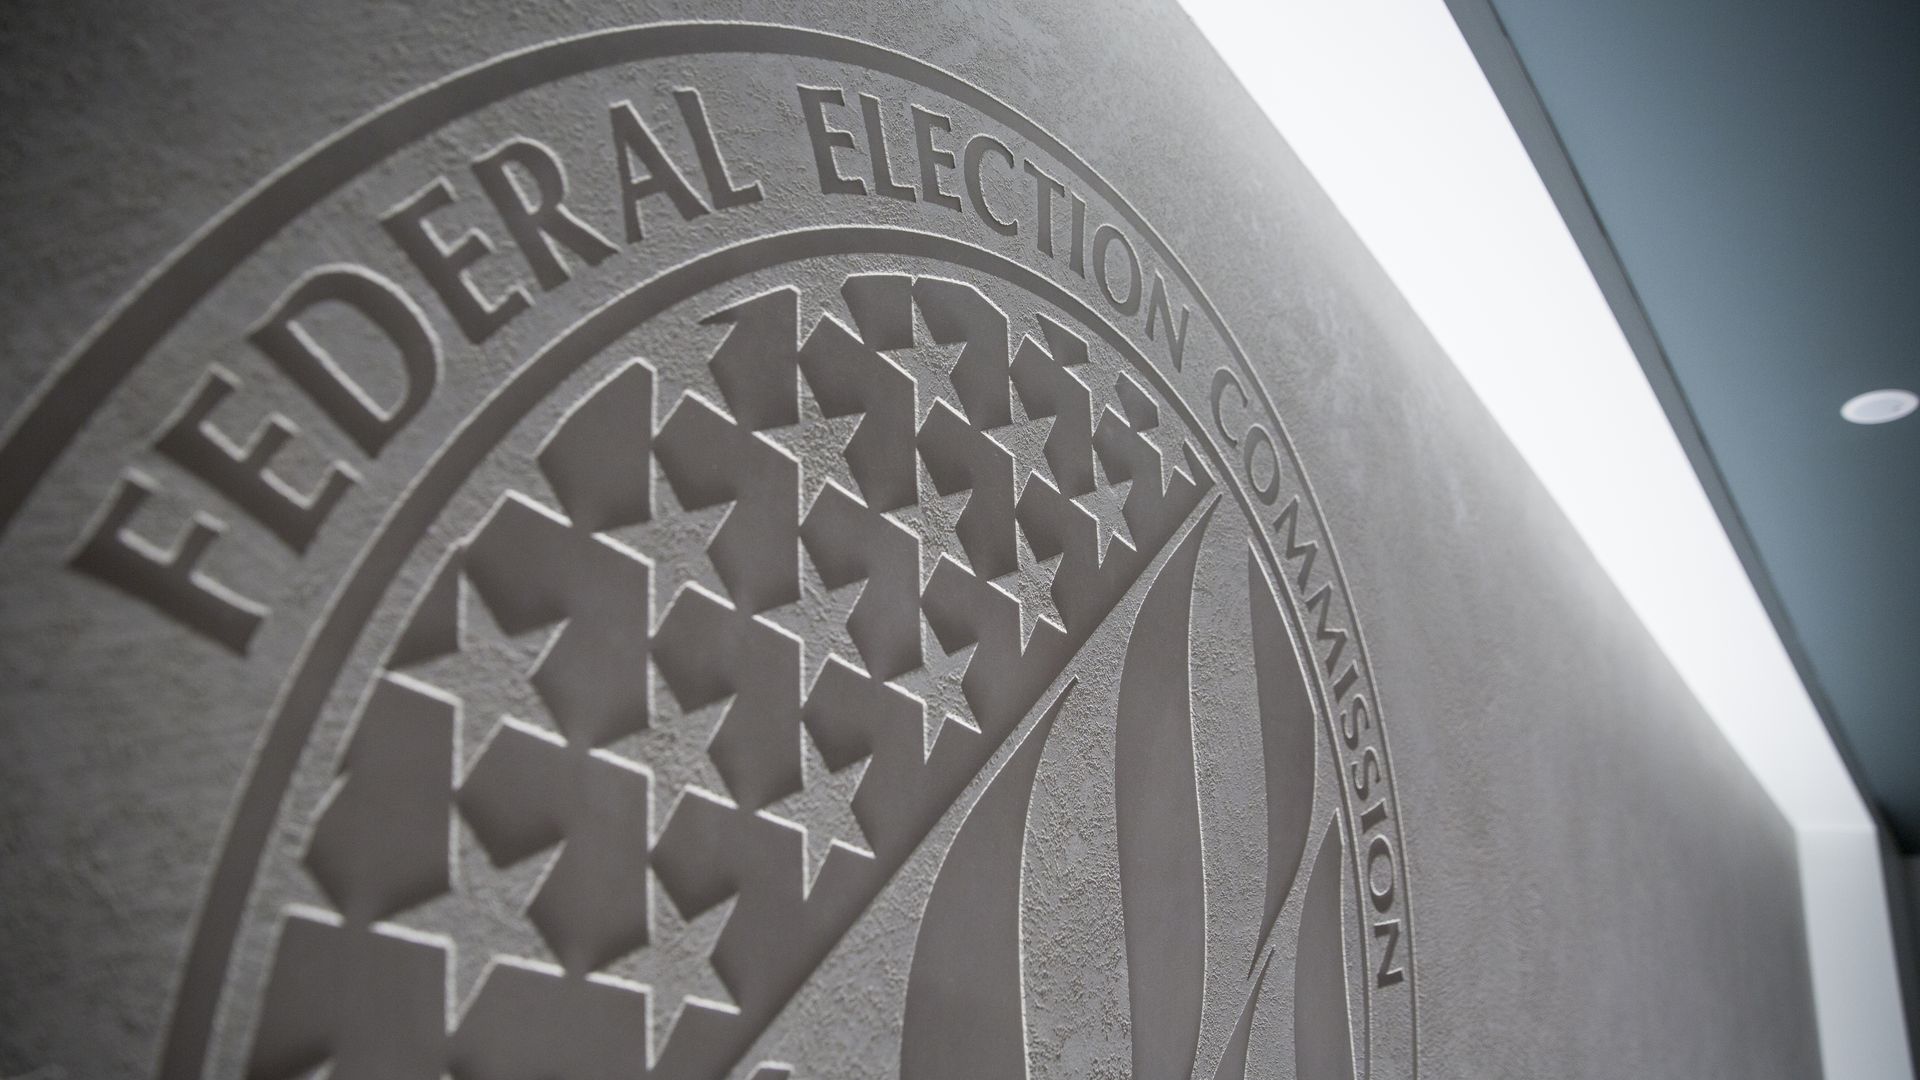 The logo of the Federal Election Commission